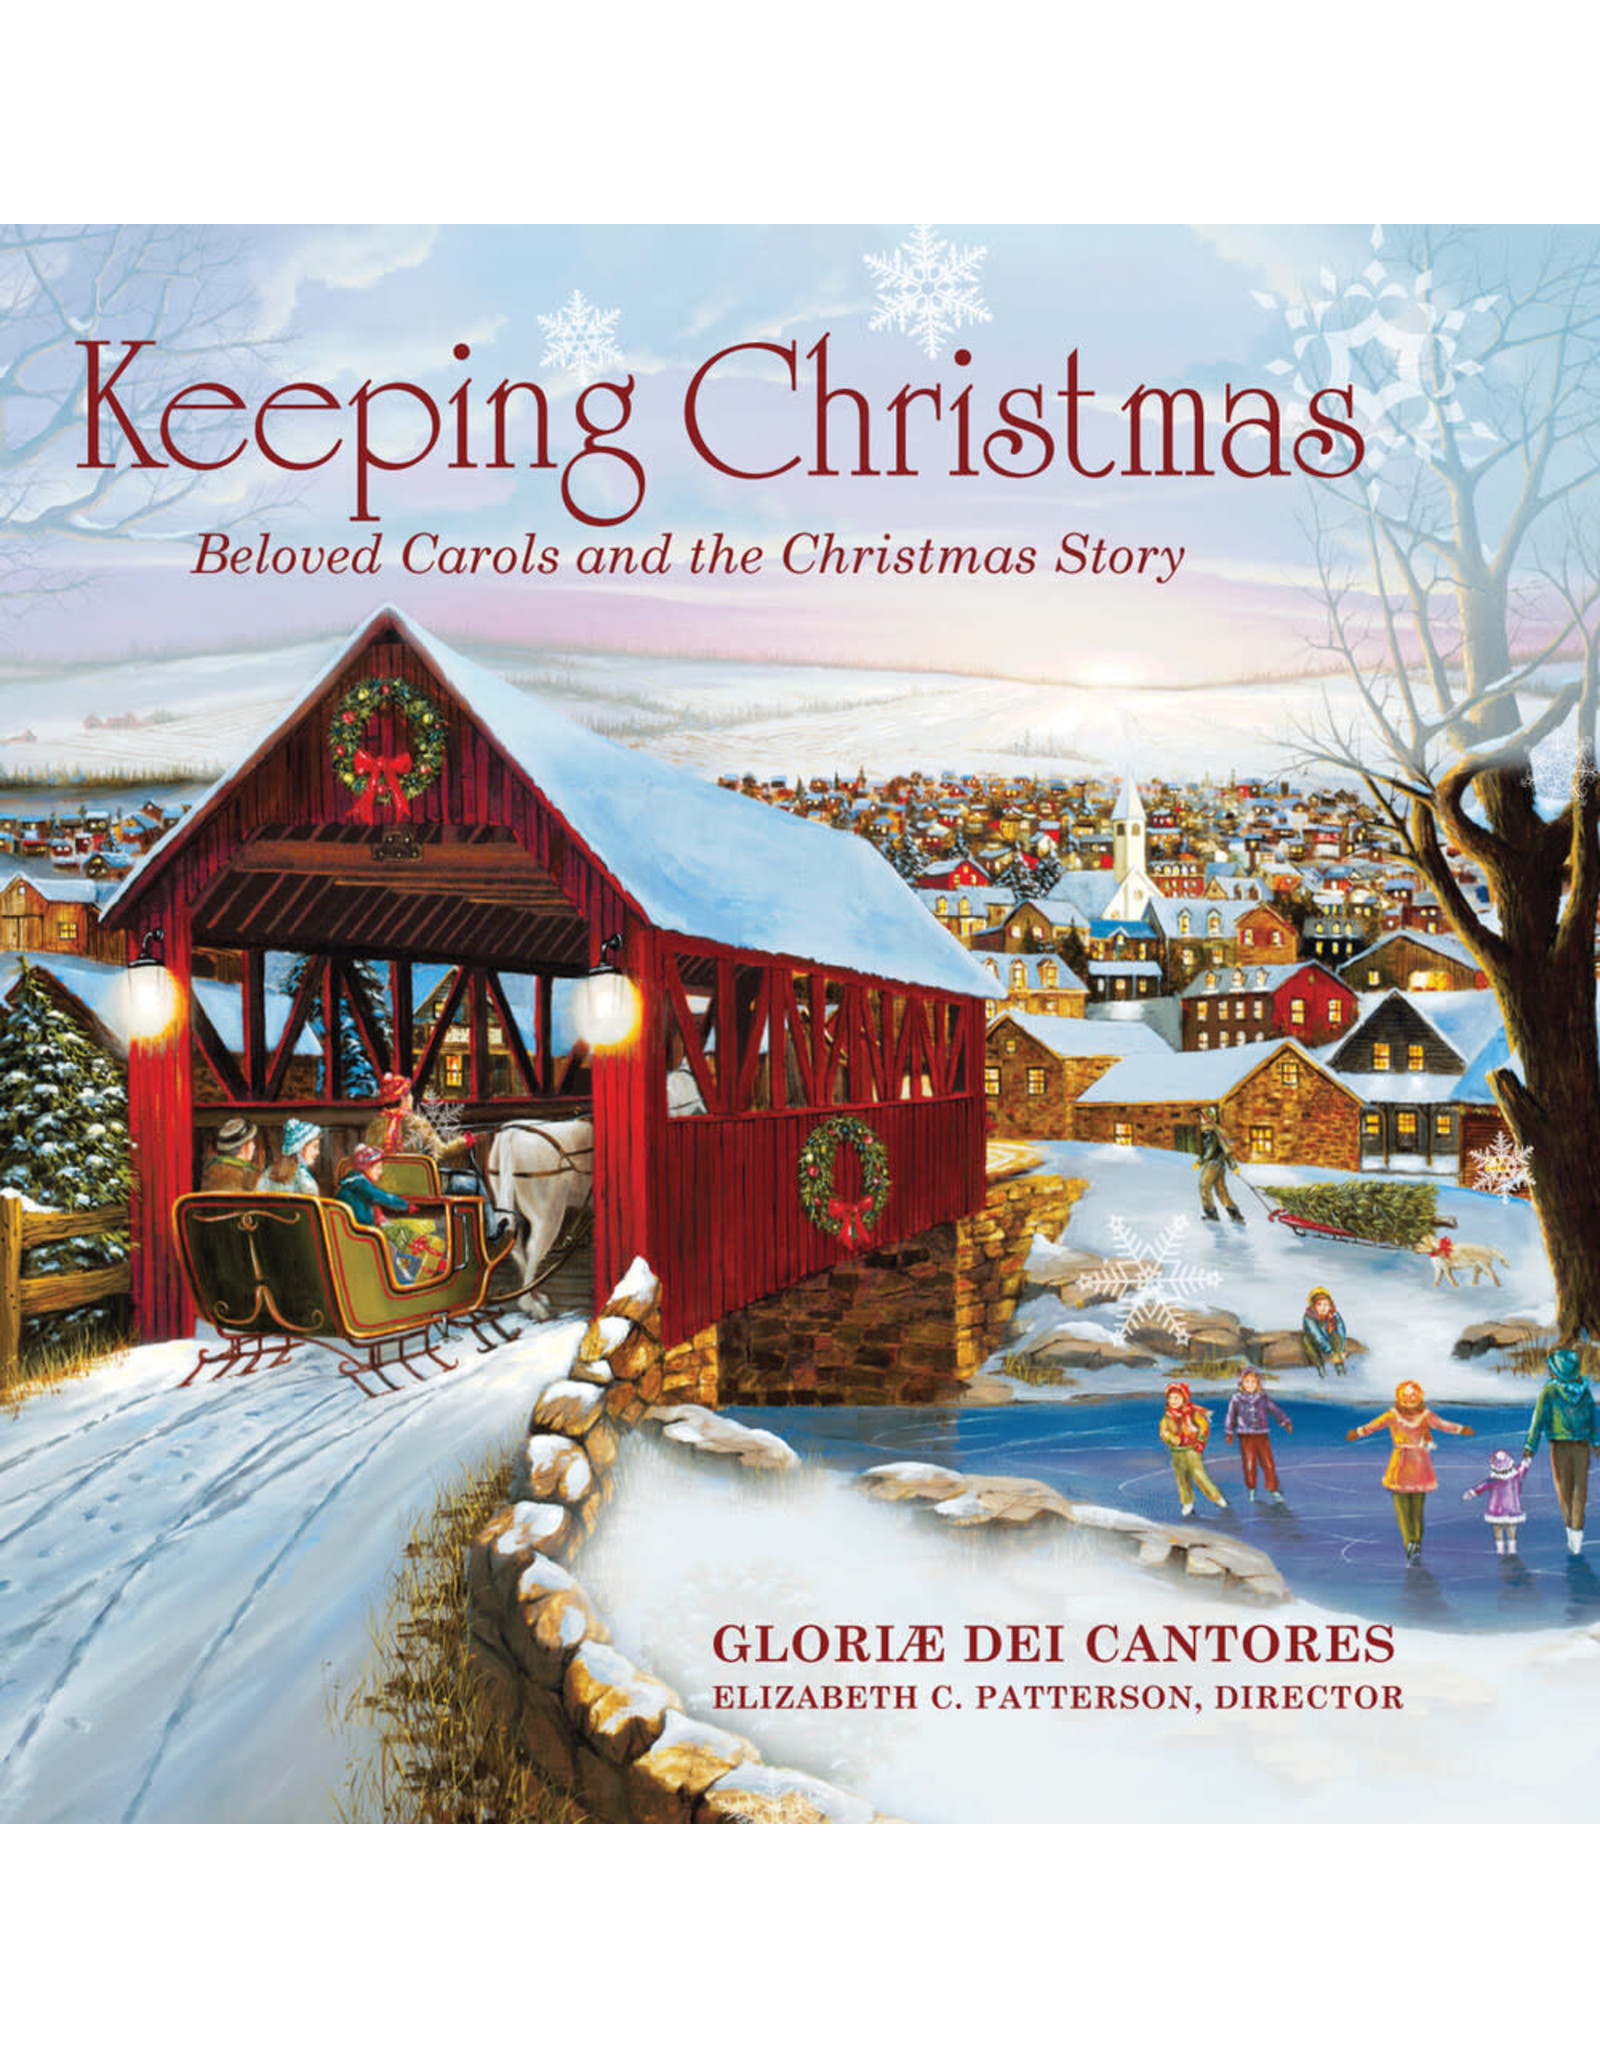 Gloria Dei Cantores Keeping Christmas: Beloved Carols and Christmas Story CD